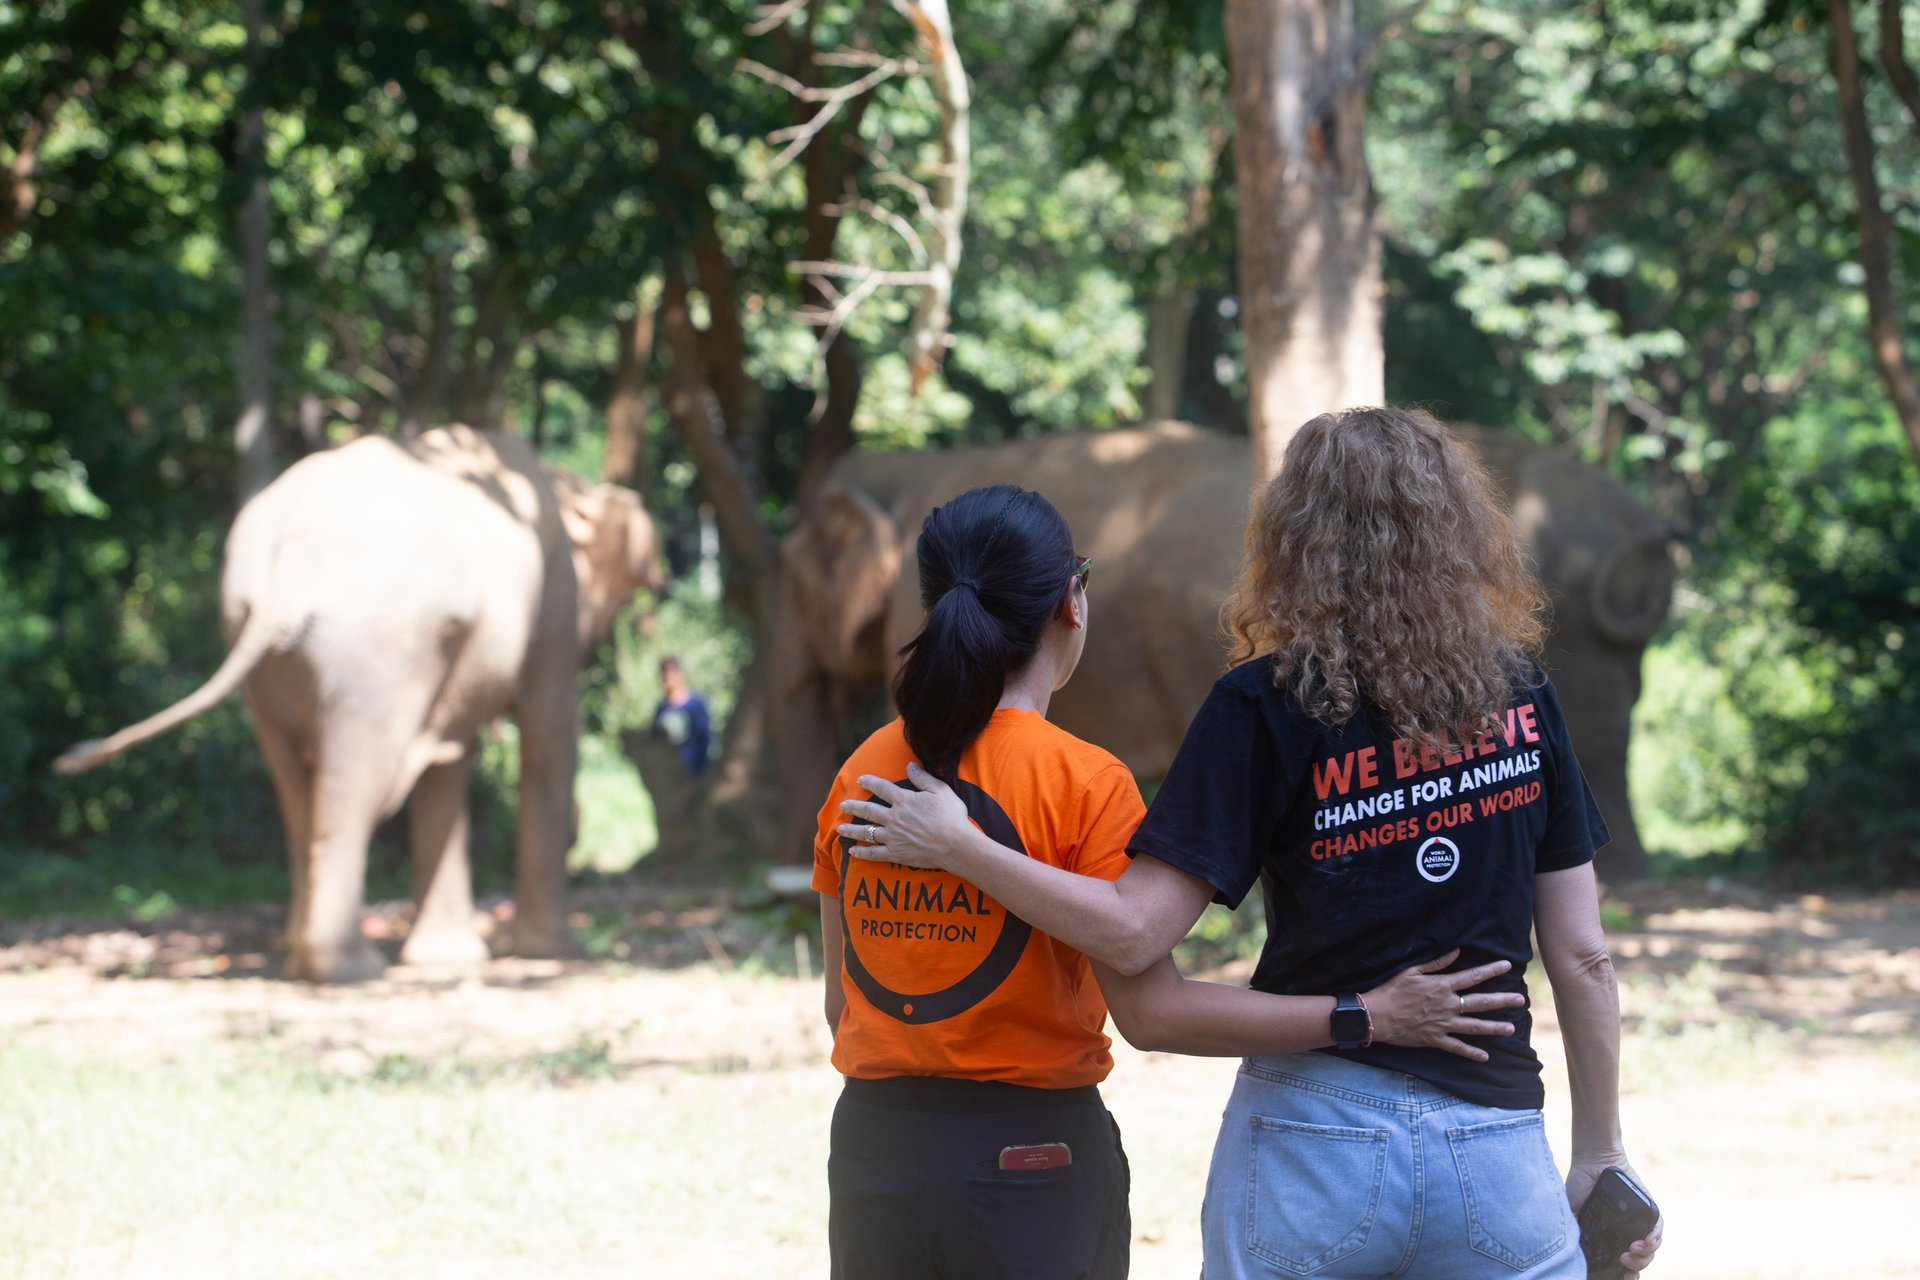 Two women are standing with their backs towards the camera looking at elephants roaming in the distance. They are wearing black and orange World Animal Protection t-shirts.